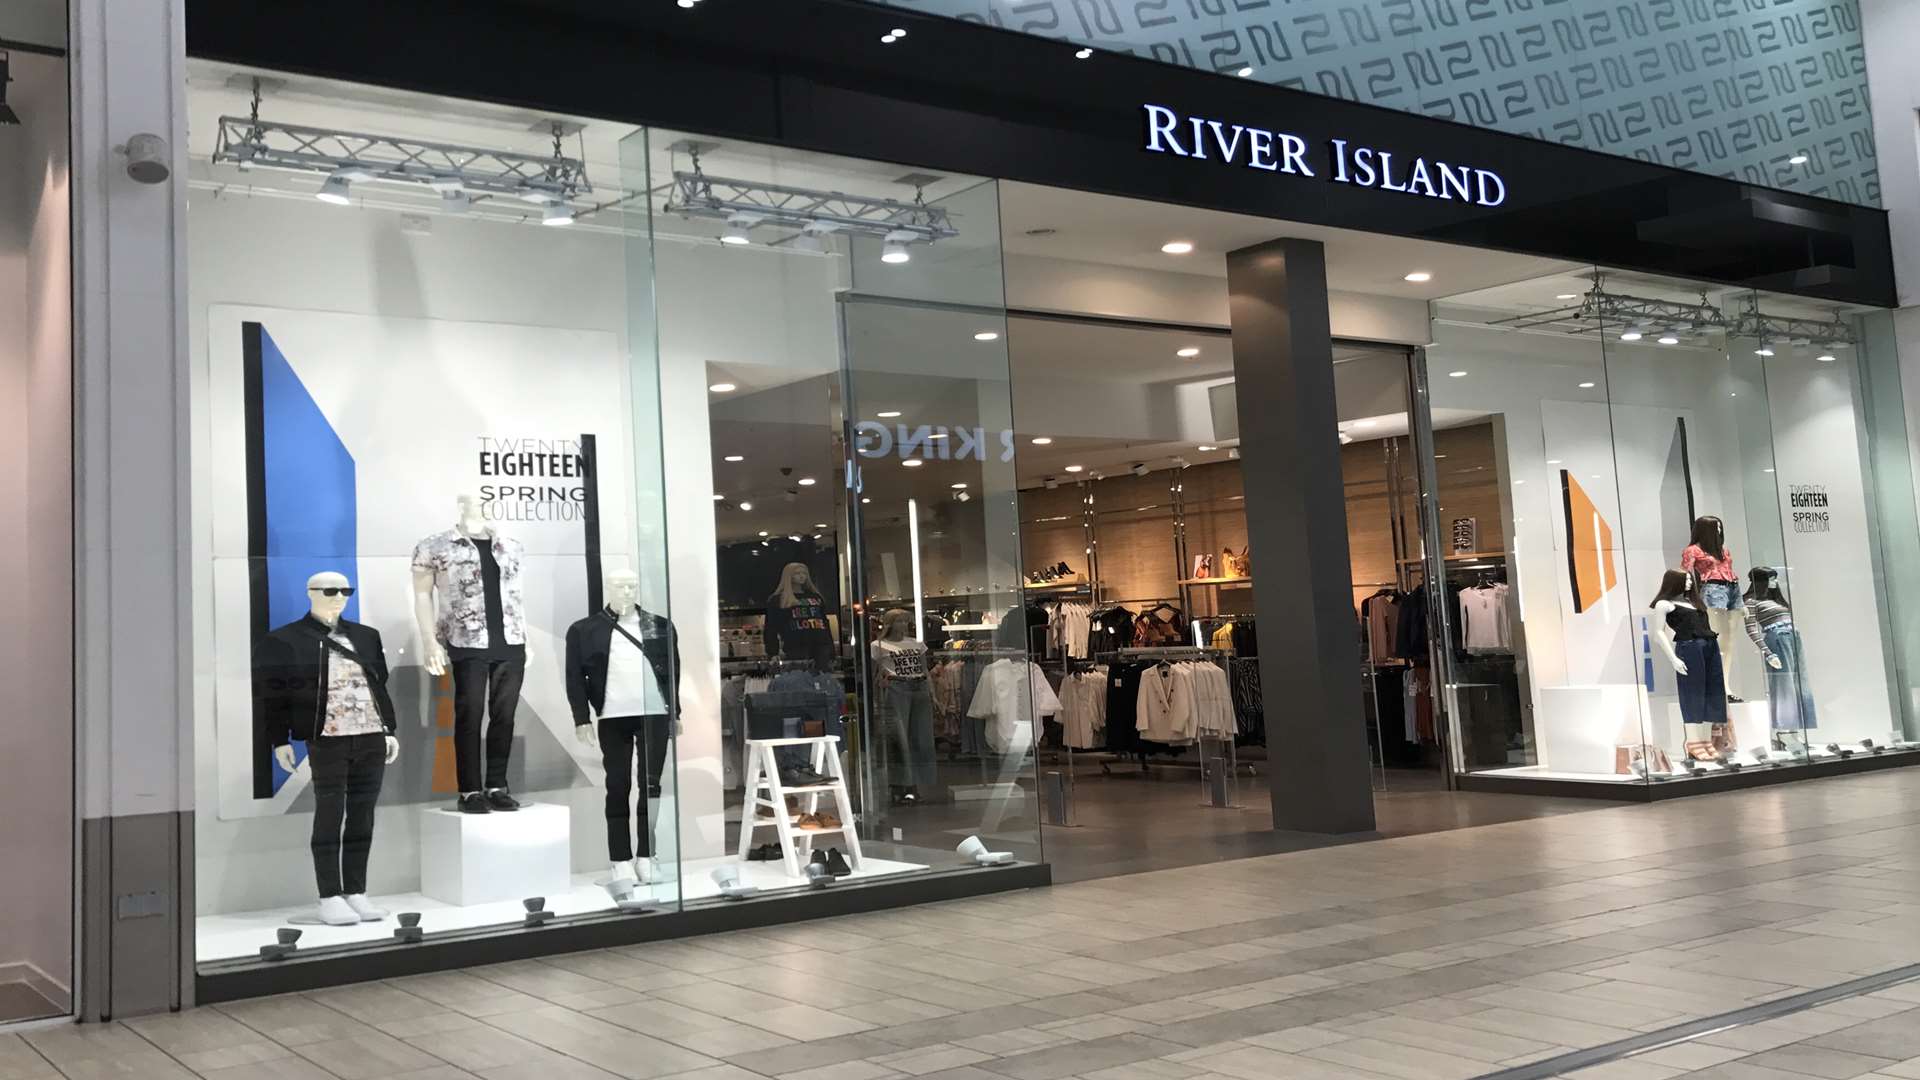 The River Island store in County Square